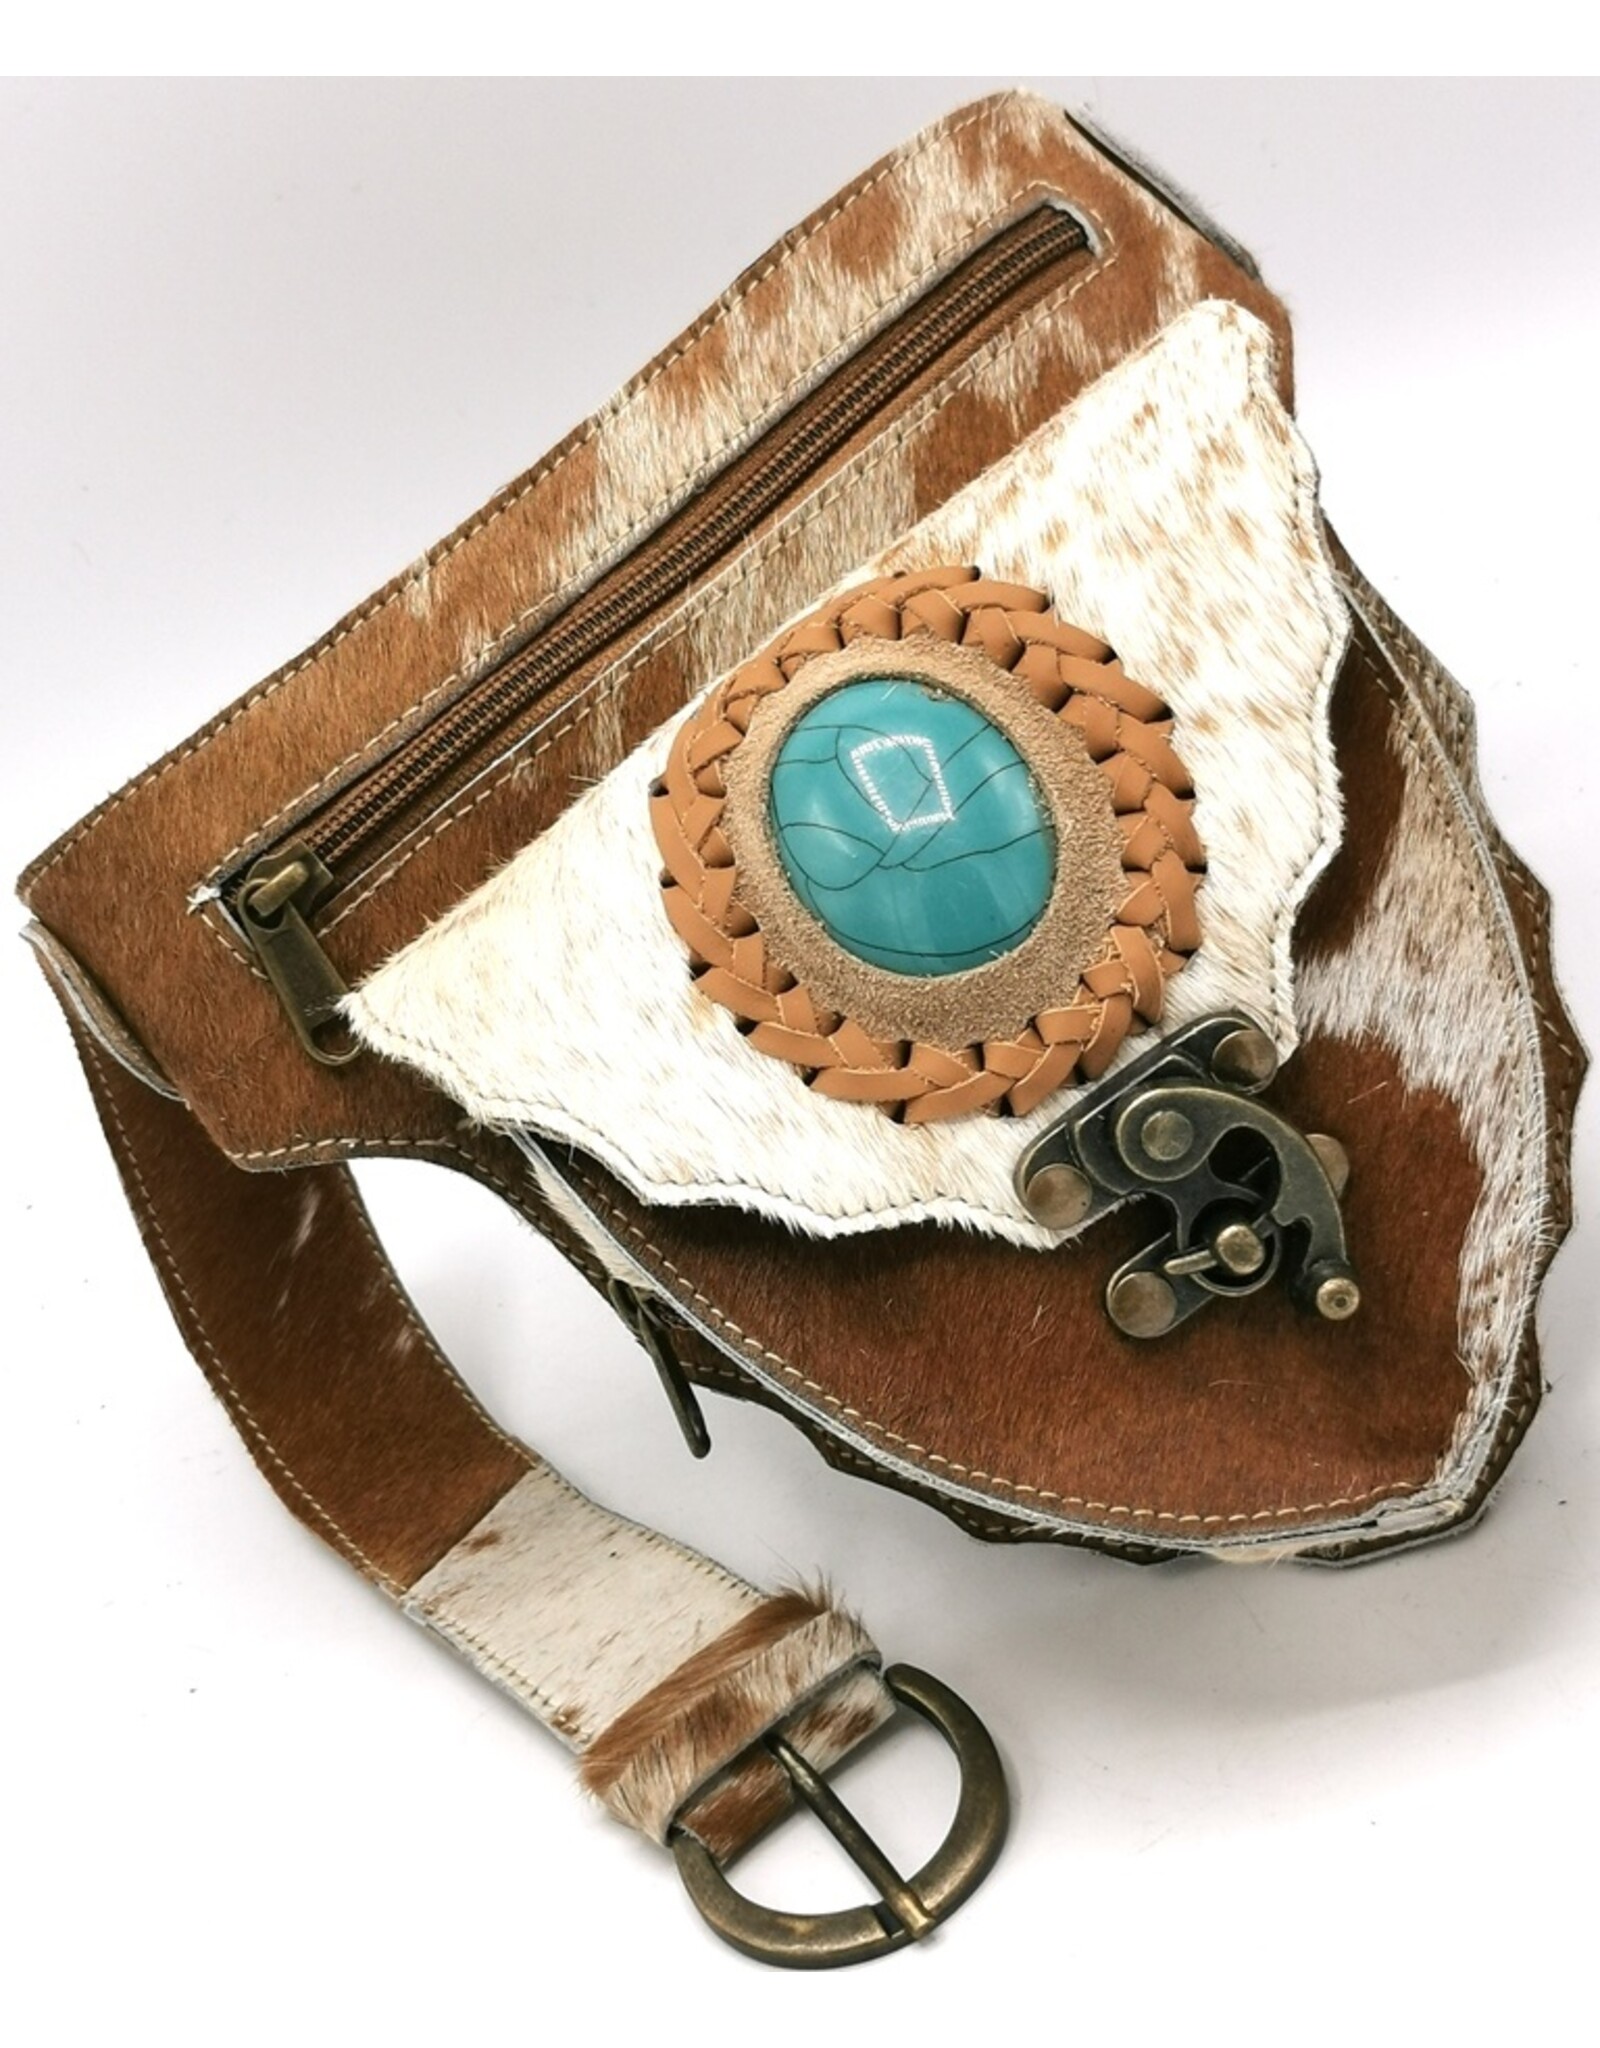 Trukado Leather Festival bags, waist bags and belt bags - Leather waist bag with cowhide Festival bag Ibiza Style